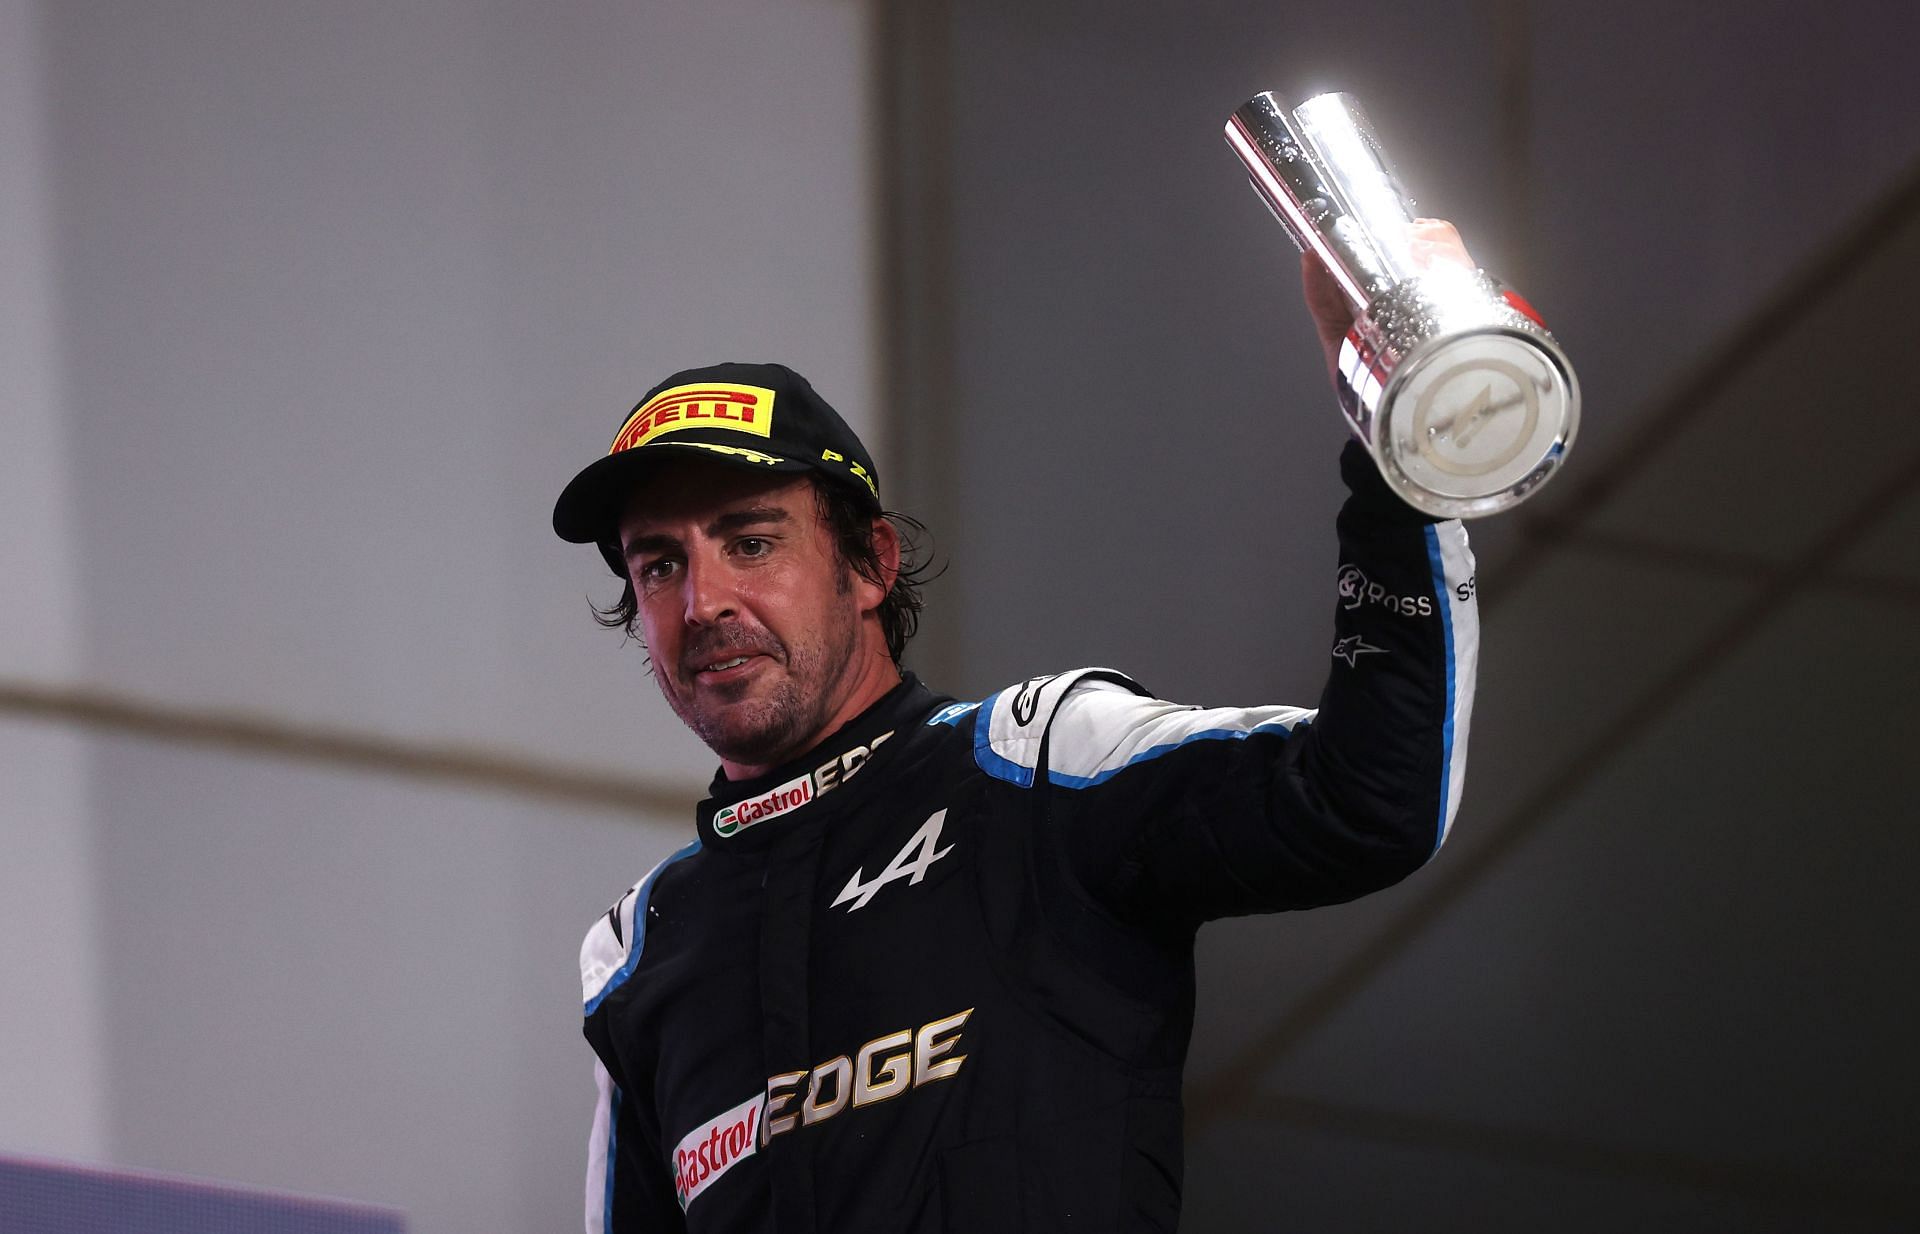 Fernando Alonso could retire from Formula 1 this season